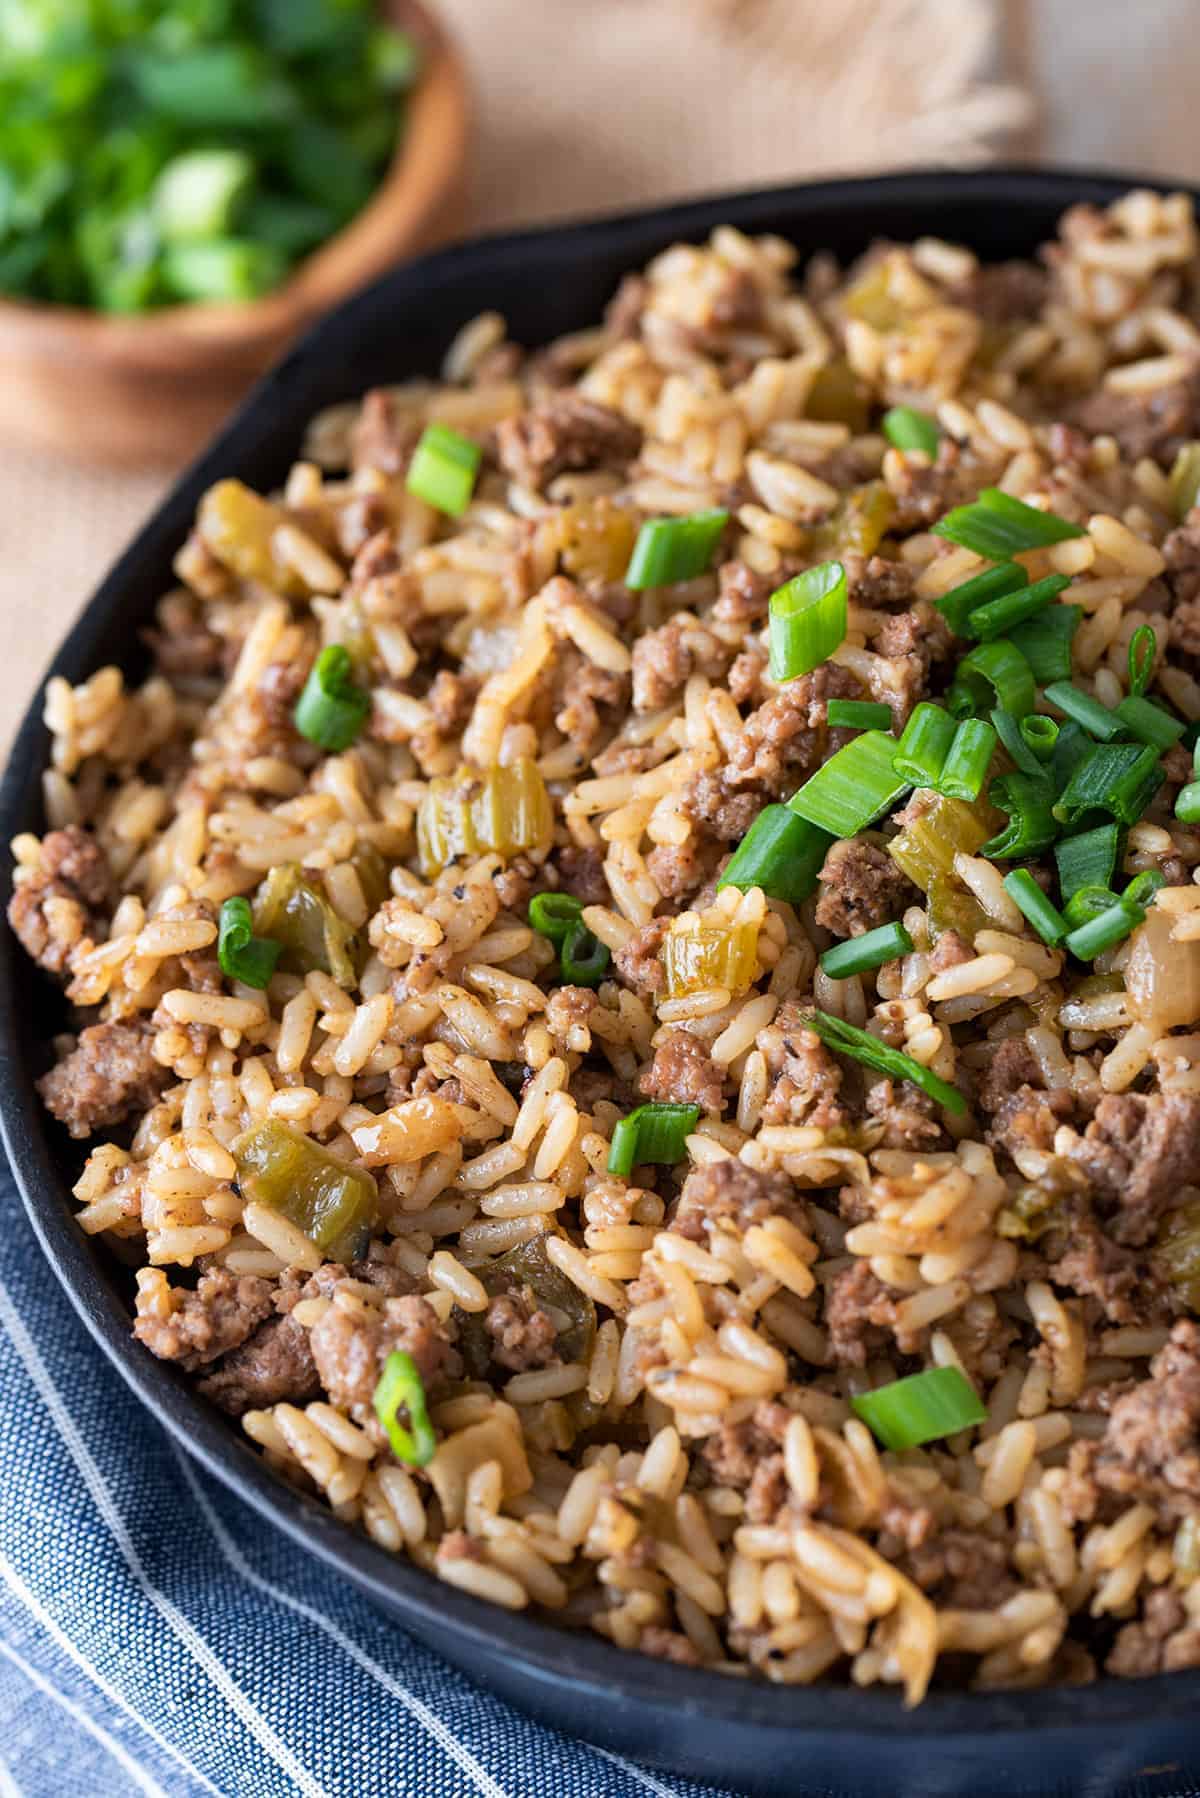 A skillet filled with rice and meat.